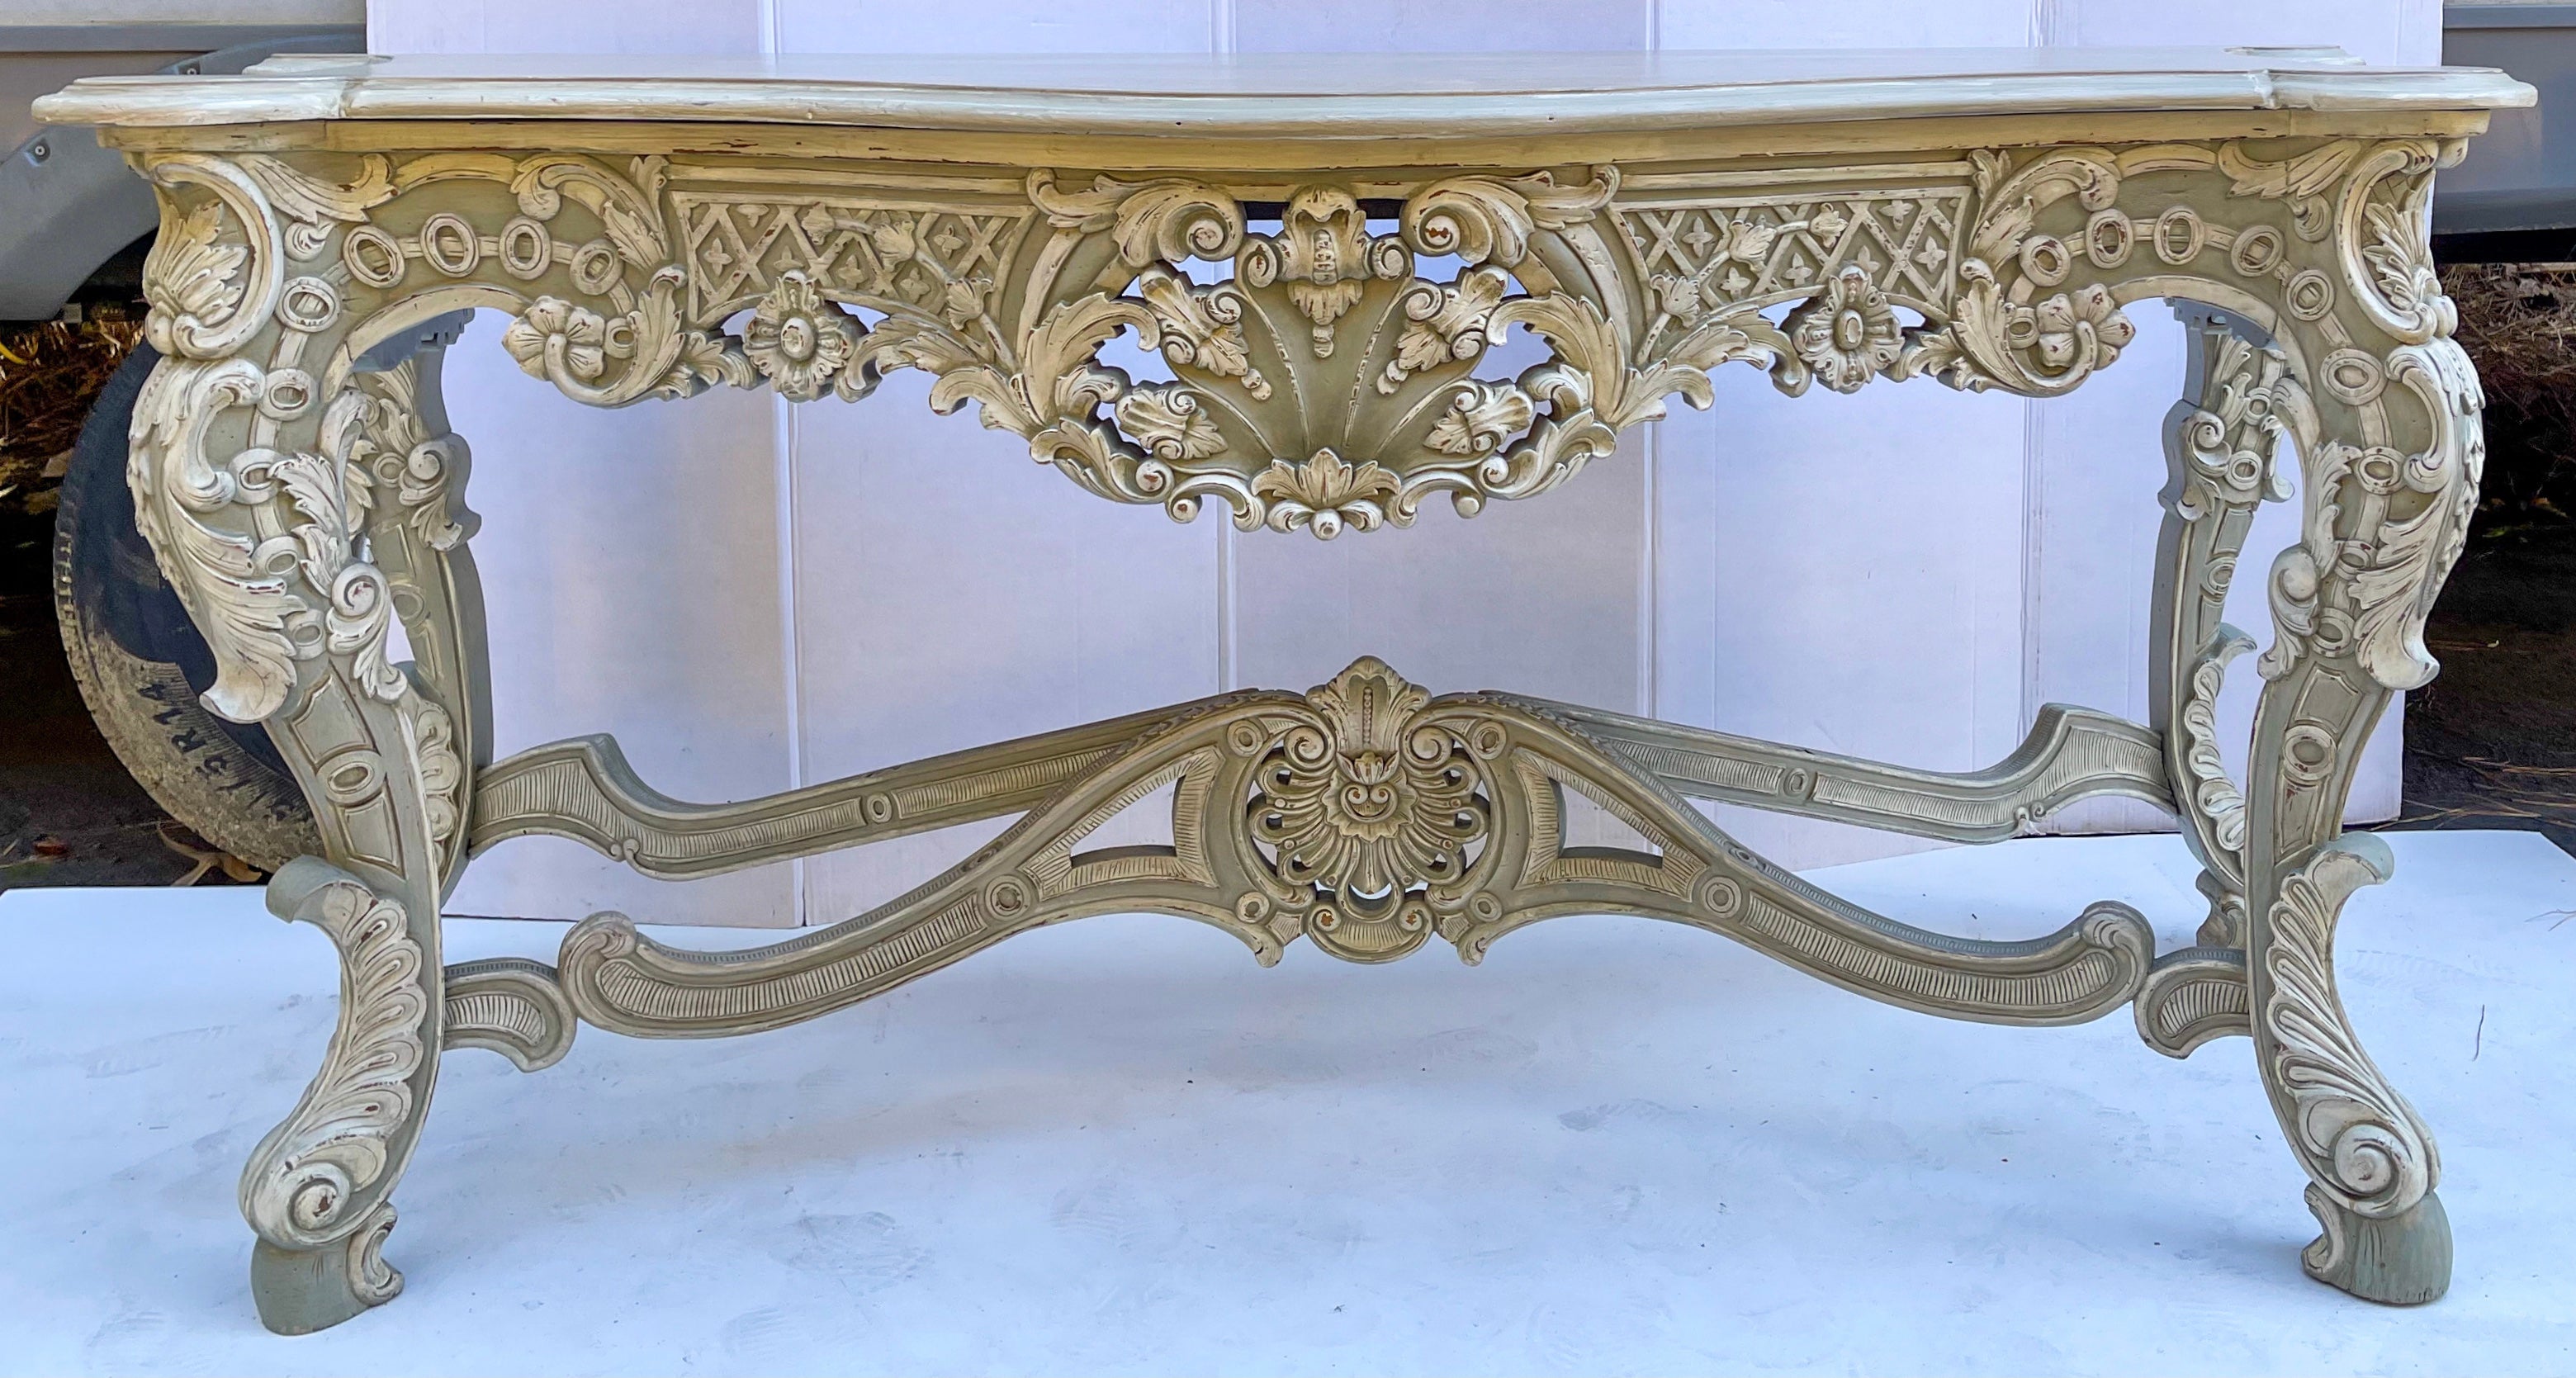 This is a show stopper! This is a 20th century French style heavily carved mahogany console table with an amazing custom painted finish in a distressed French gray and ivory. It is unmarked and in very good condition.